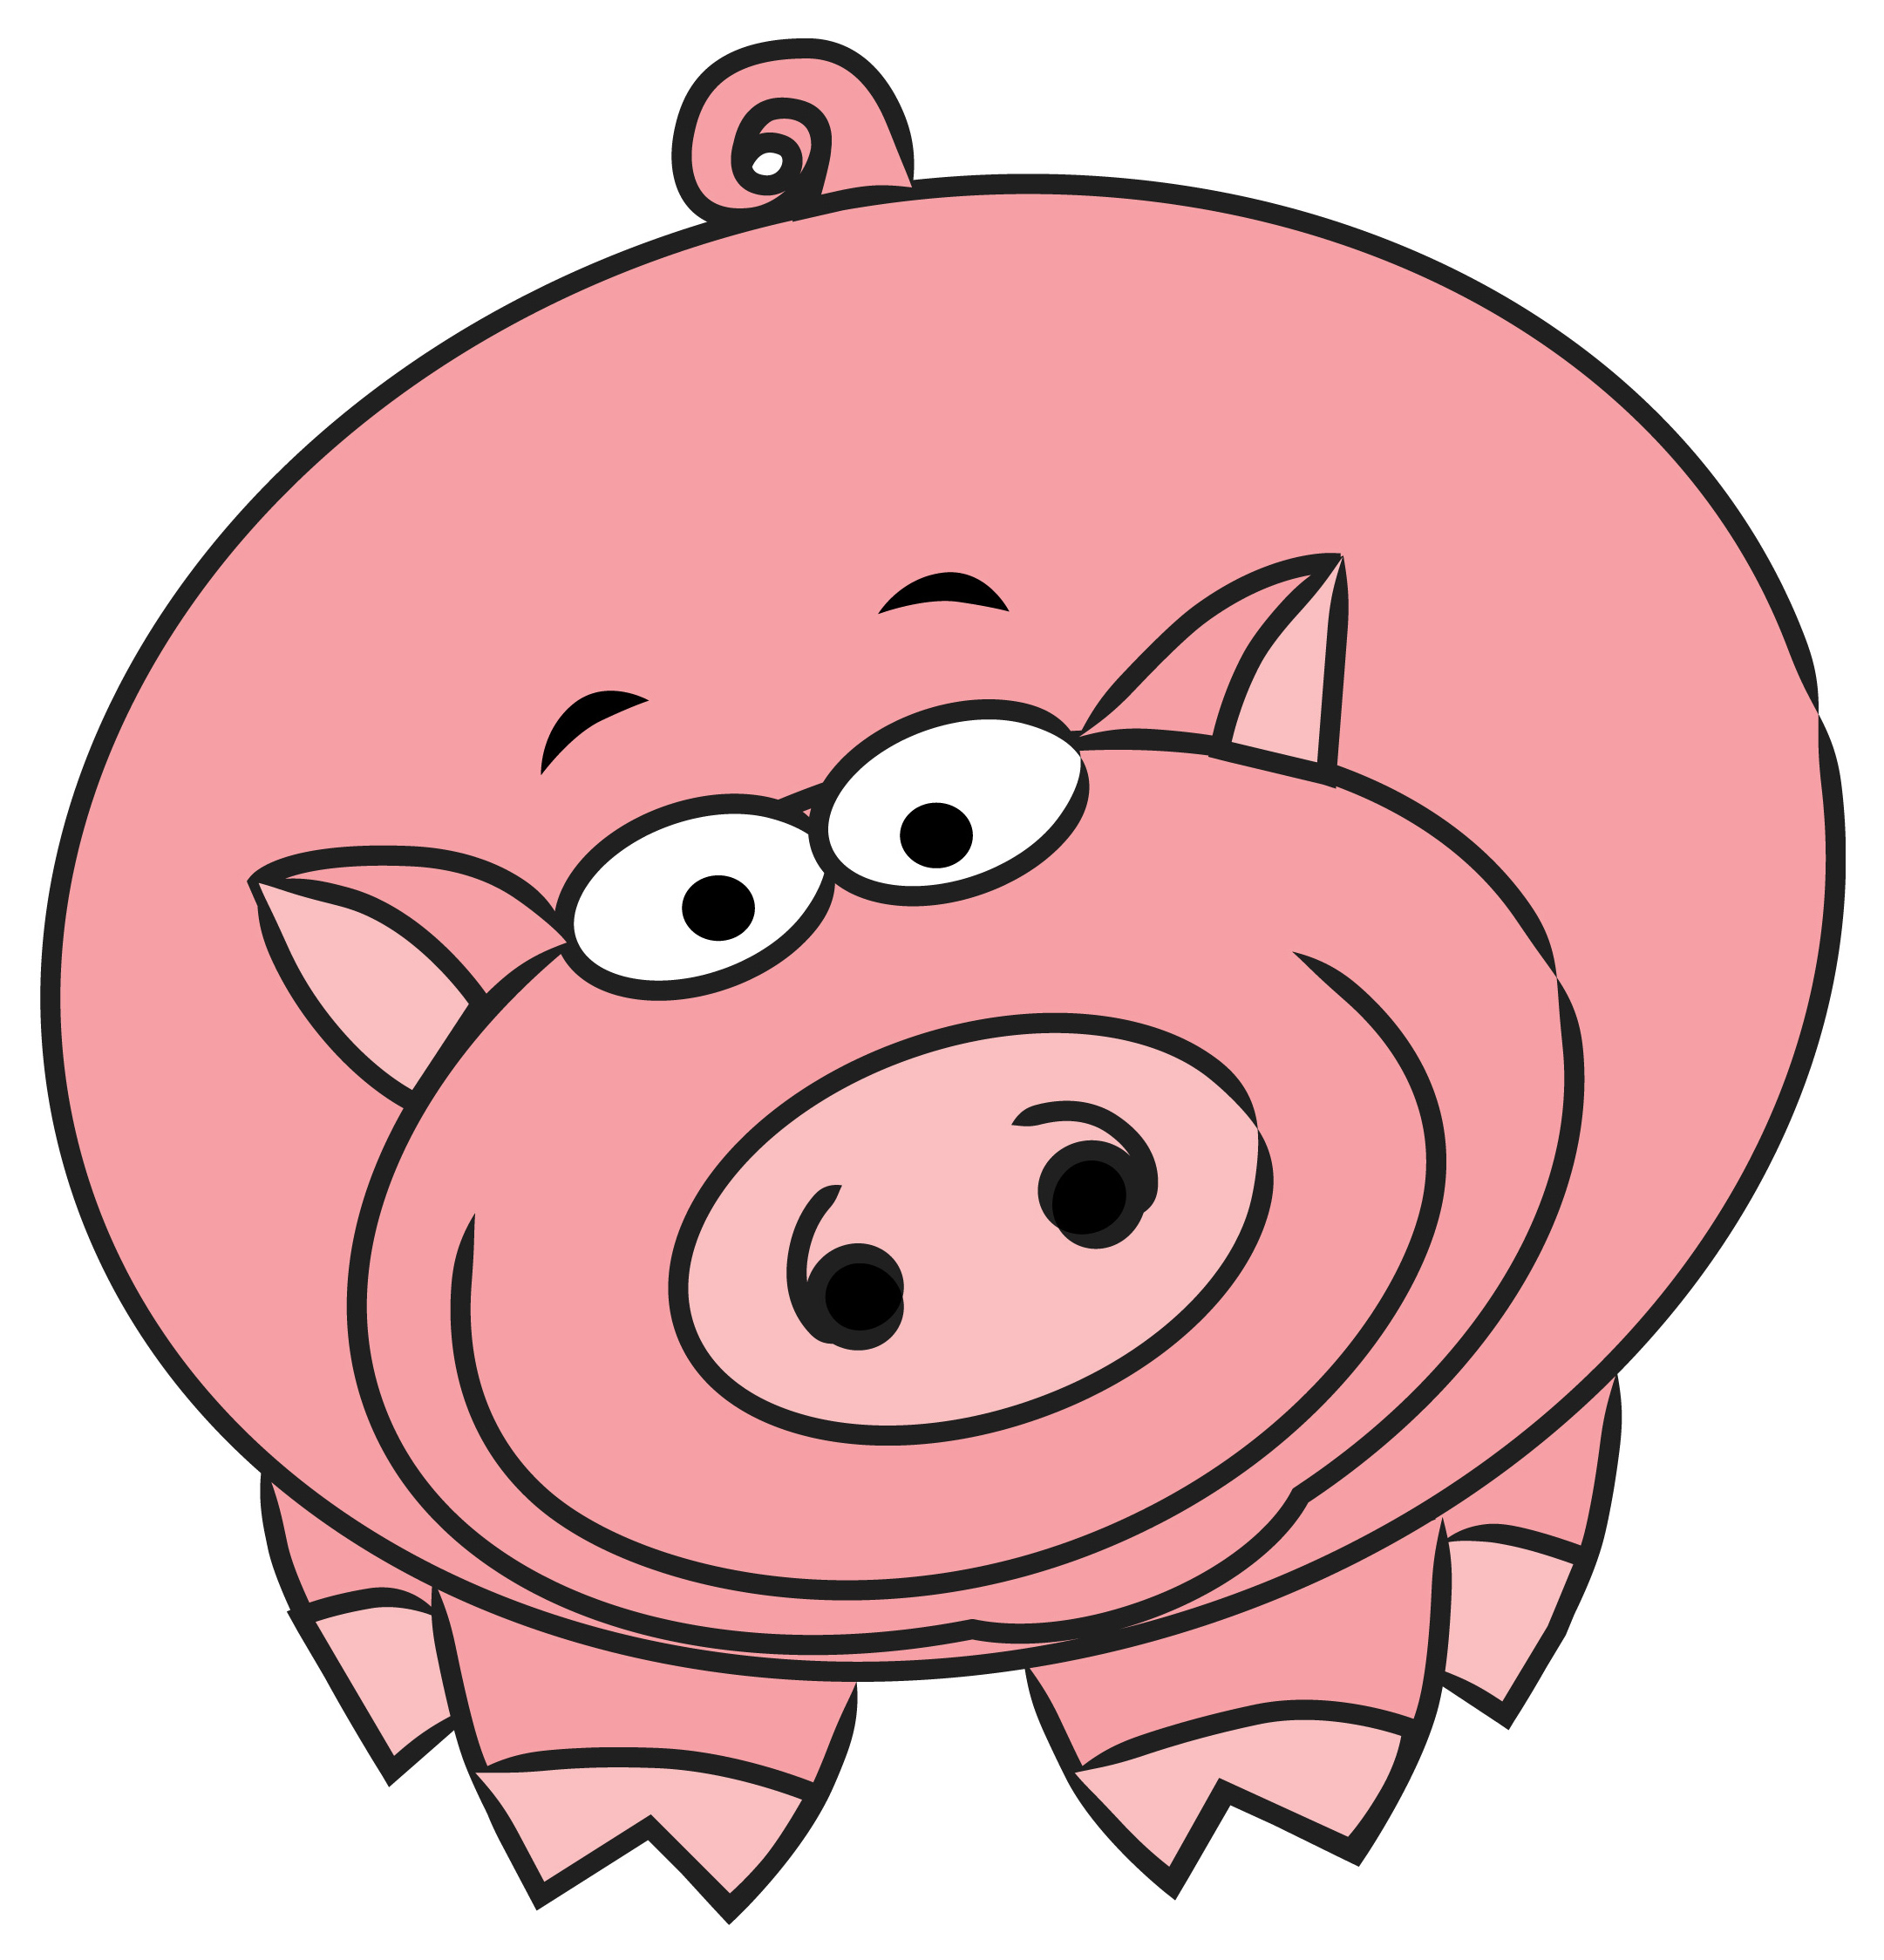 Draw-a-Pig-Intro.jpg - ClipArt Best - ClipArt Best